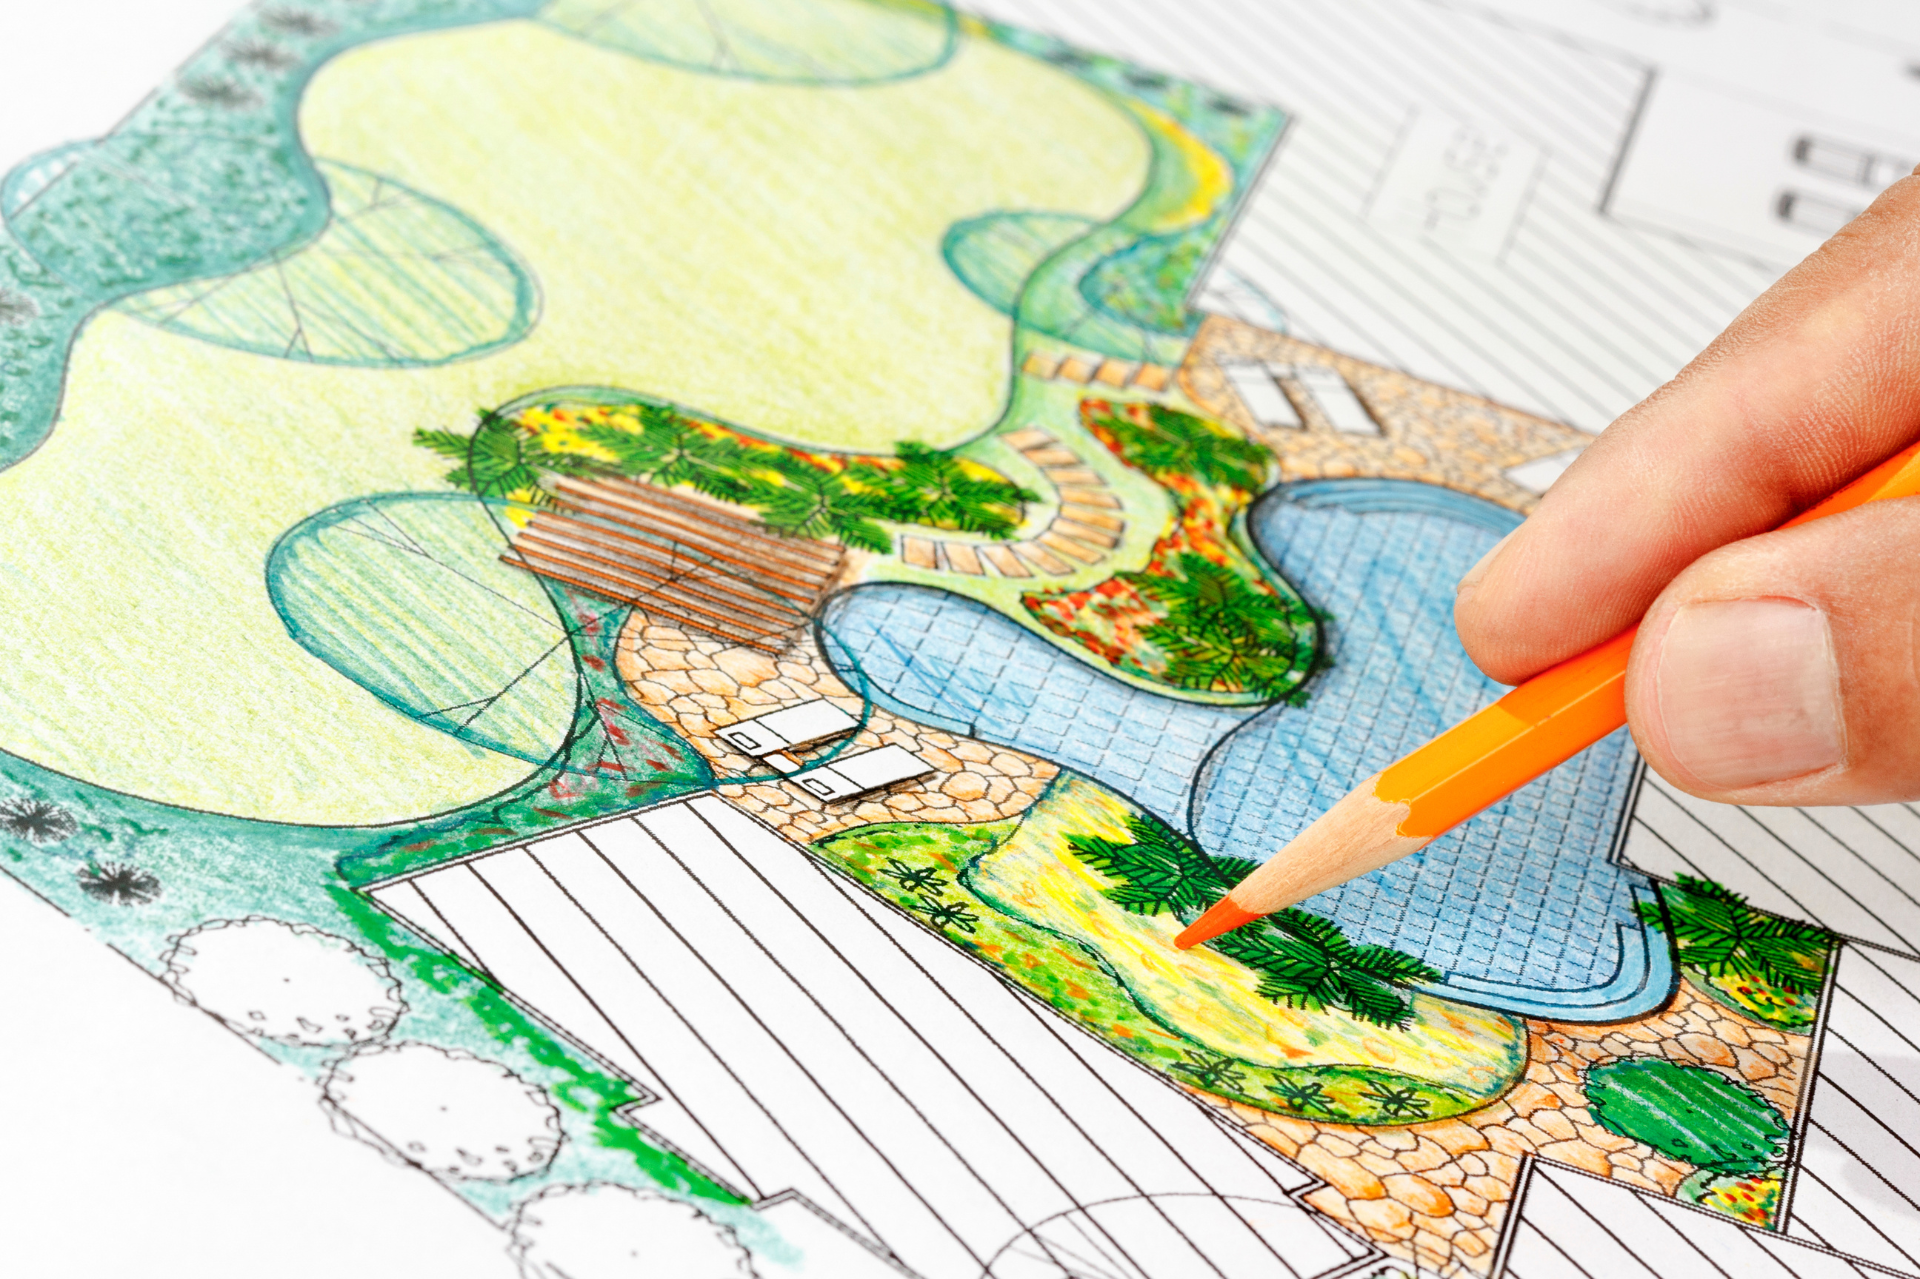 A landscape designer is drawing a garden with a pencil